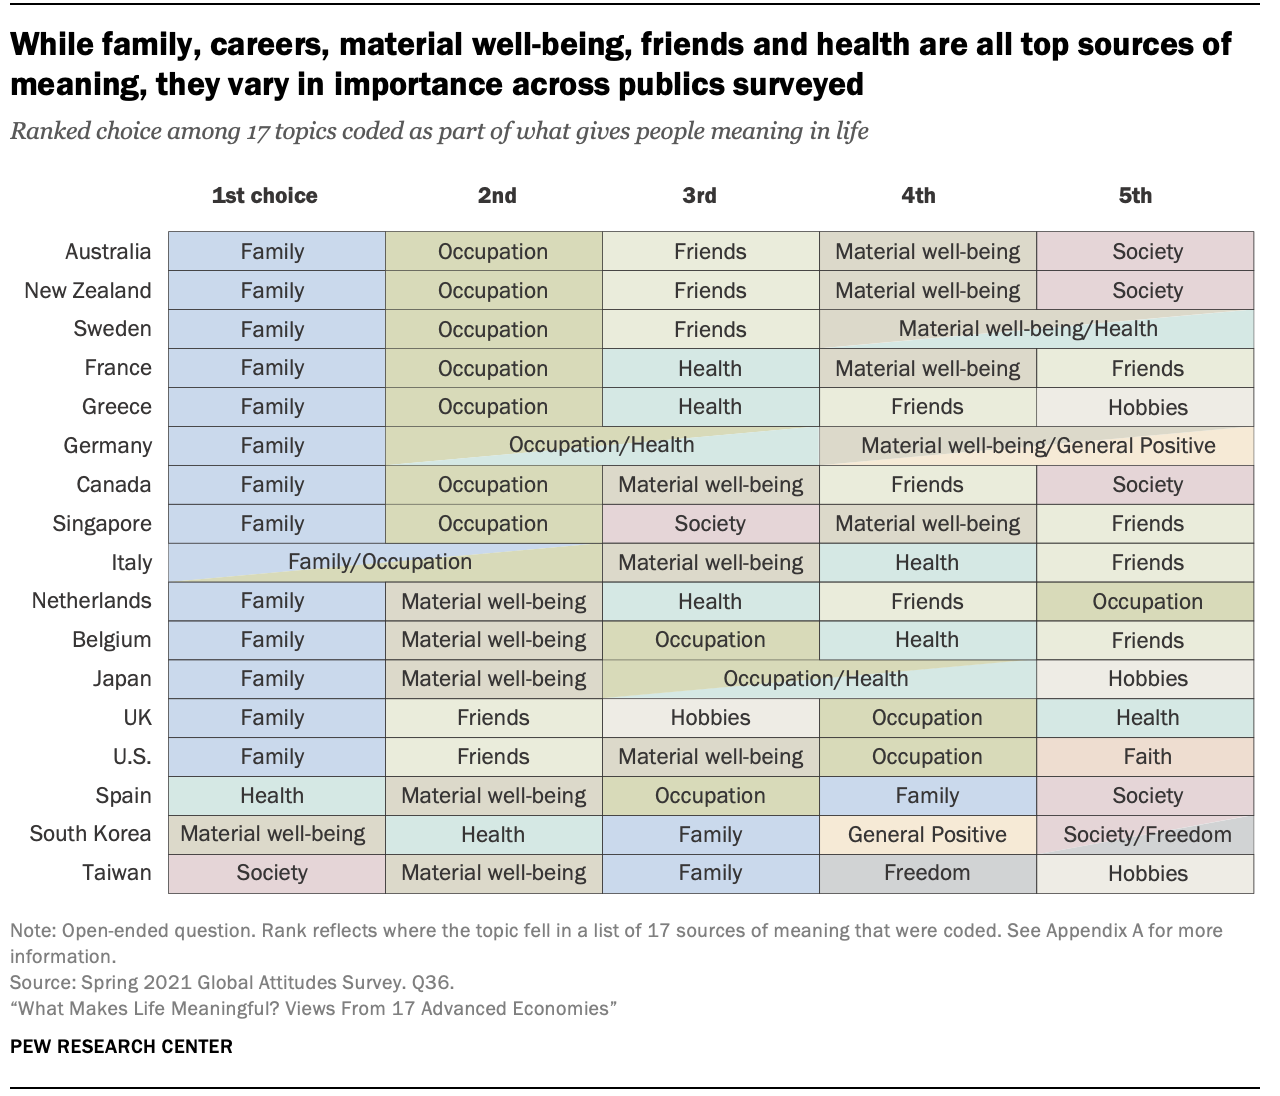 While family, careers, material well-being, friends and health are all top sources of meaning, they vary in importance across publics surveyed.